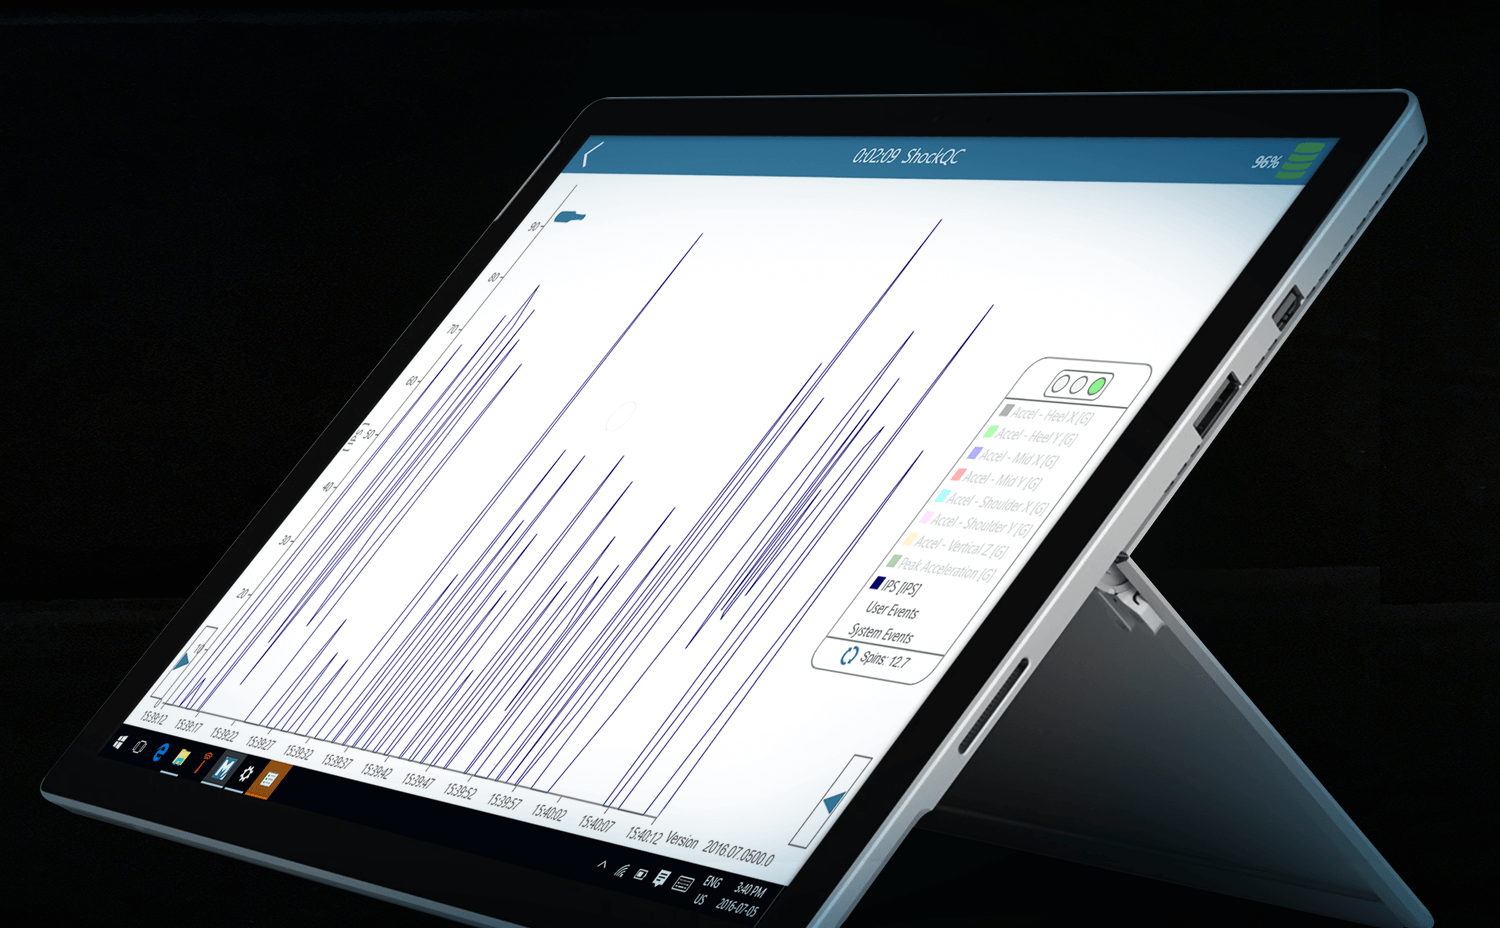 Tablet showing Masitek software to record events and runs